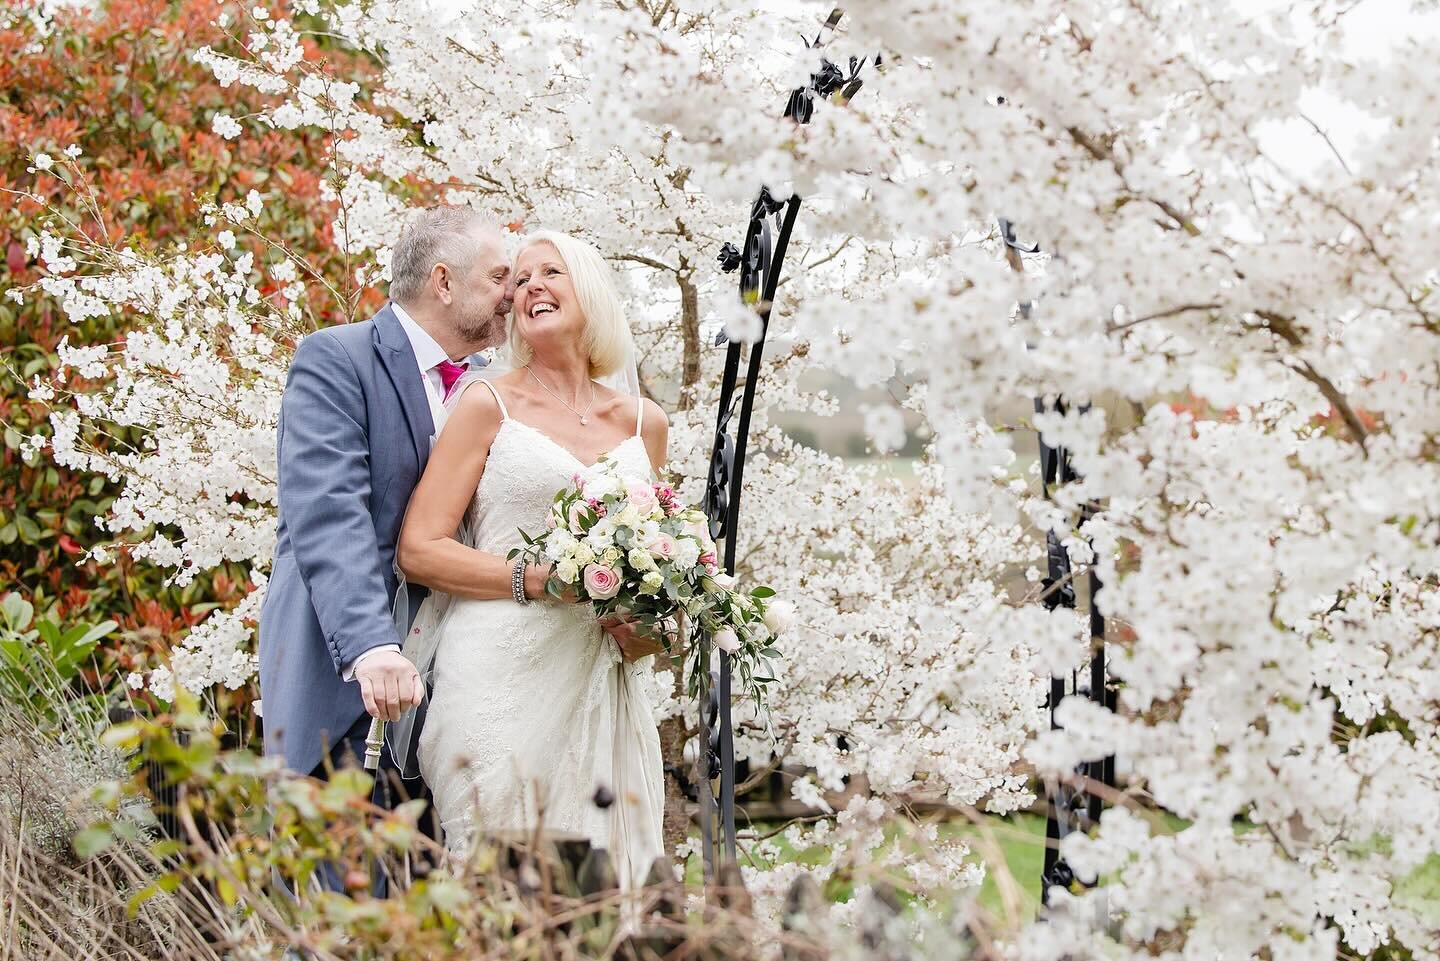 What a wonderful way to kick off my 2024 wedding season! An impossibly loved-up couple, a picturesque venue, an epic band and heaps of fluffy BLOSSOM! 🤍

Erica and Dave were an absolute joy. They got married at The Orchard in Maidstone, a real gem o